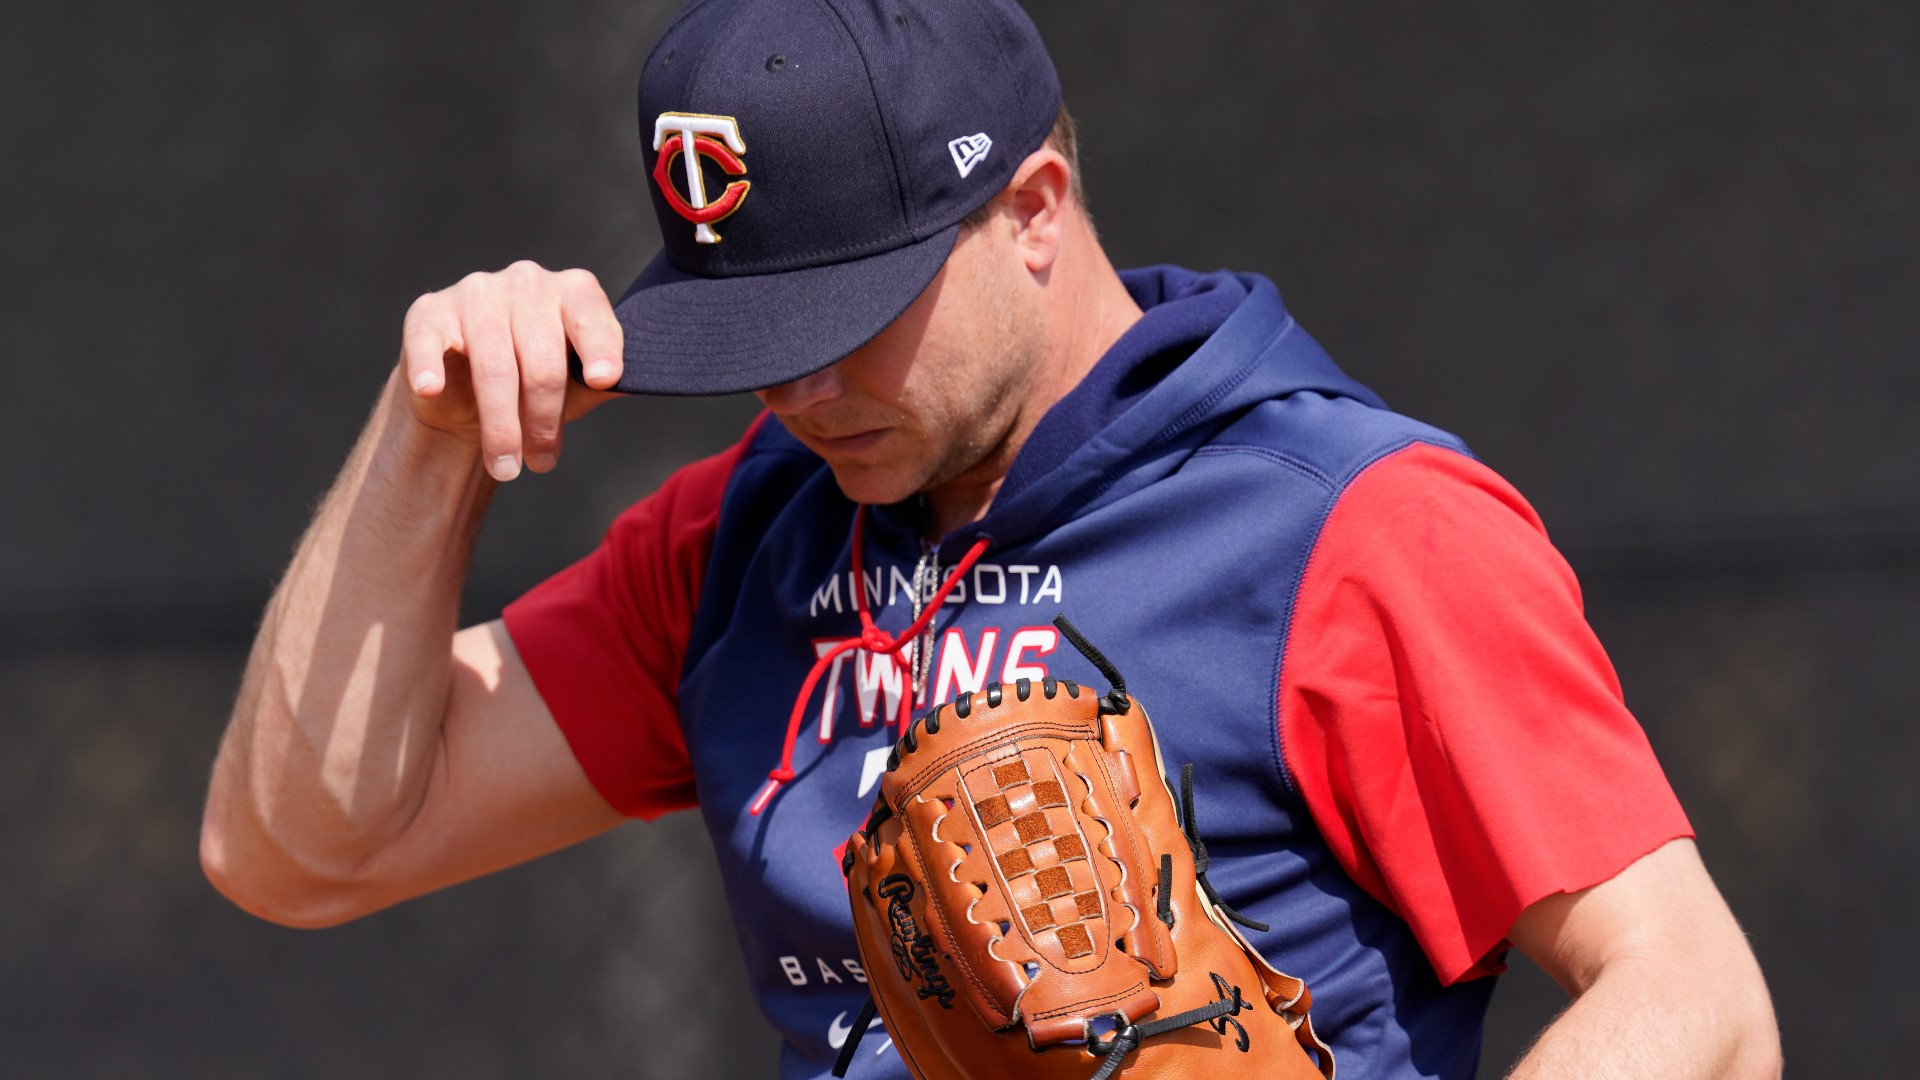 Ahead of this week's Twins opener, we're rattling off the team's latest additions.